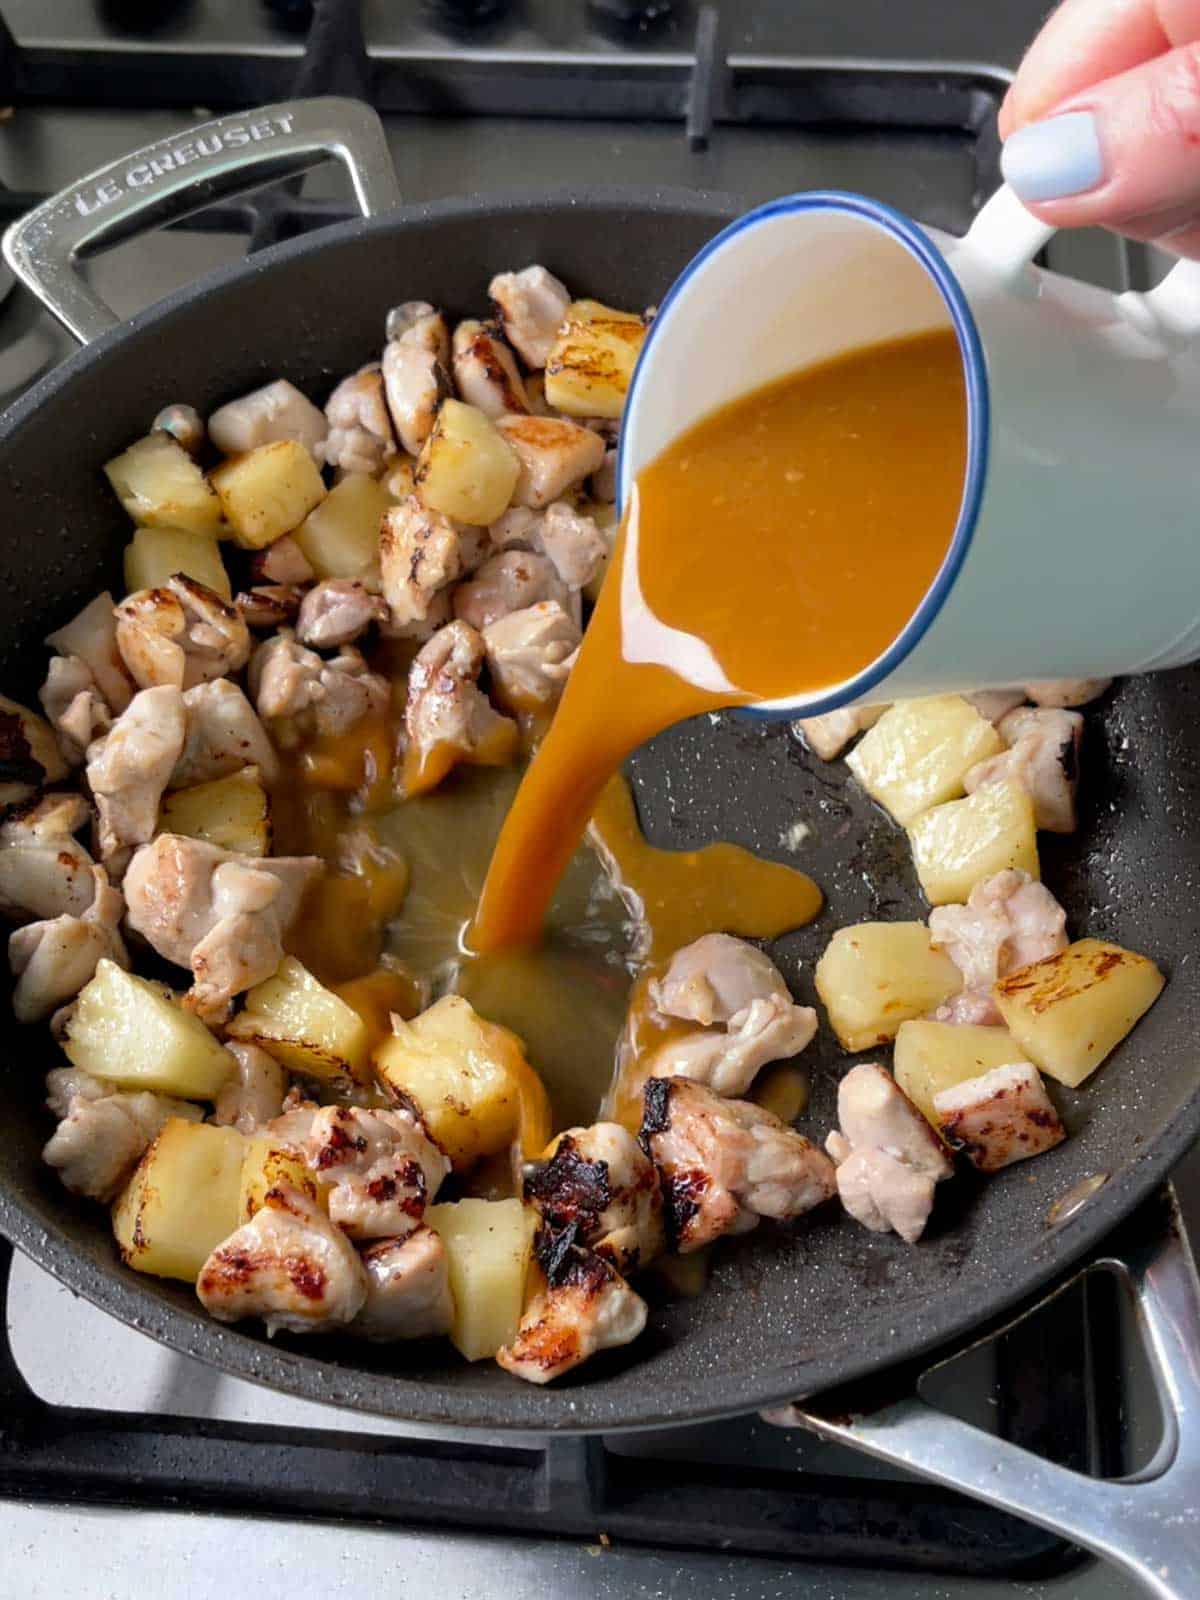 Pork and Pineapple cooking in a black frying pan.